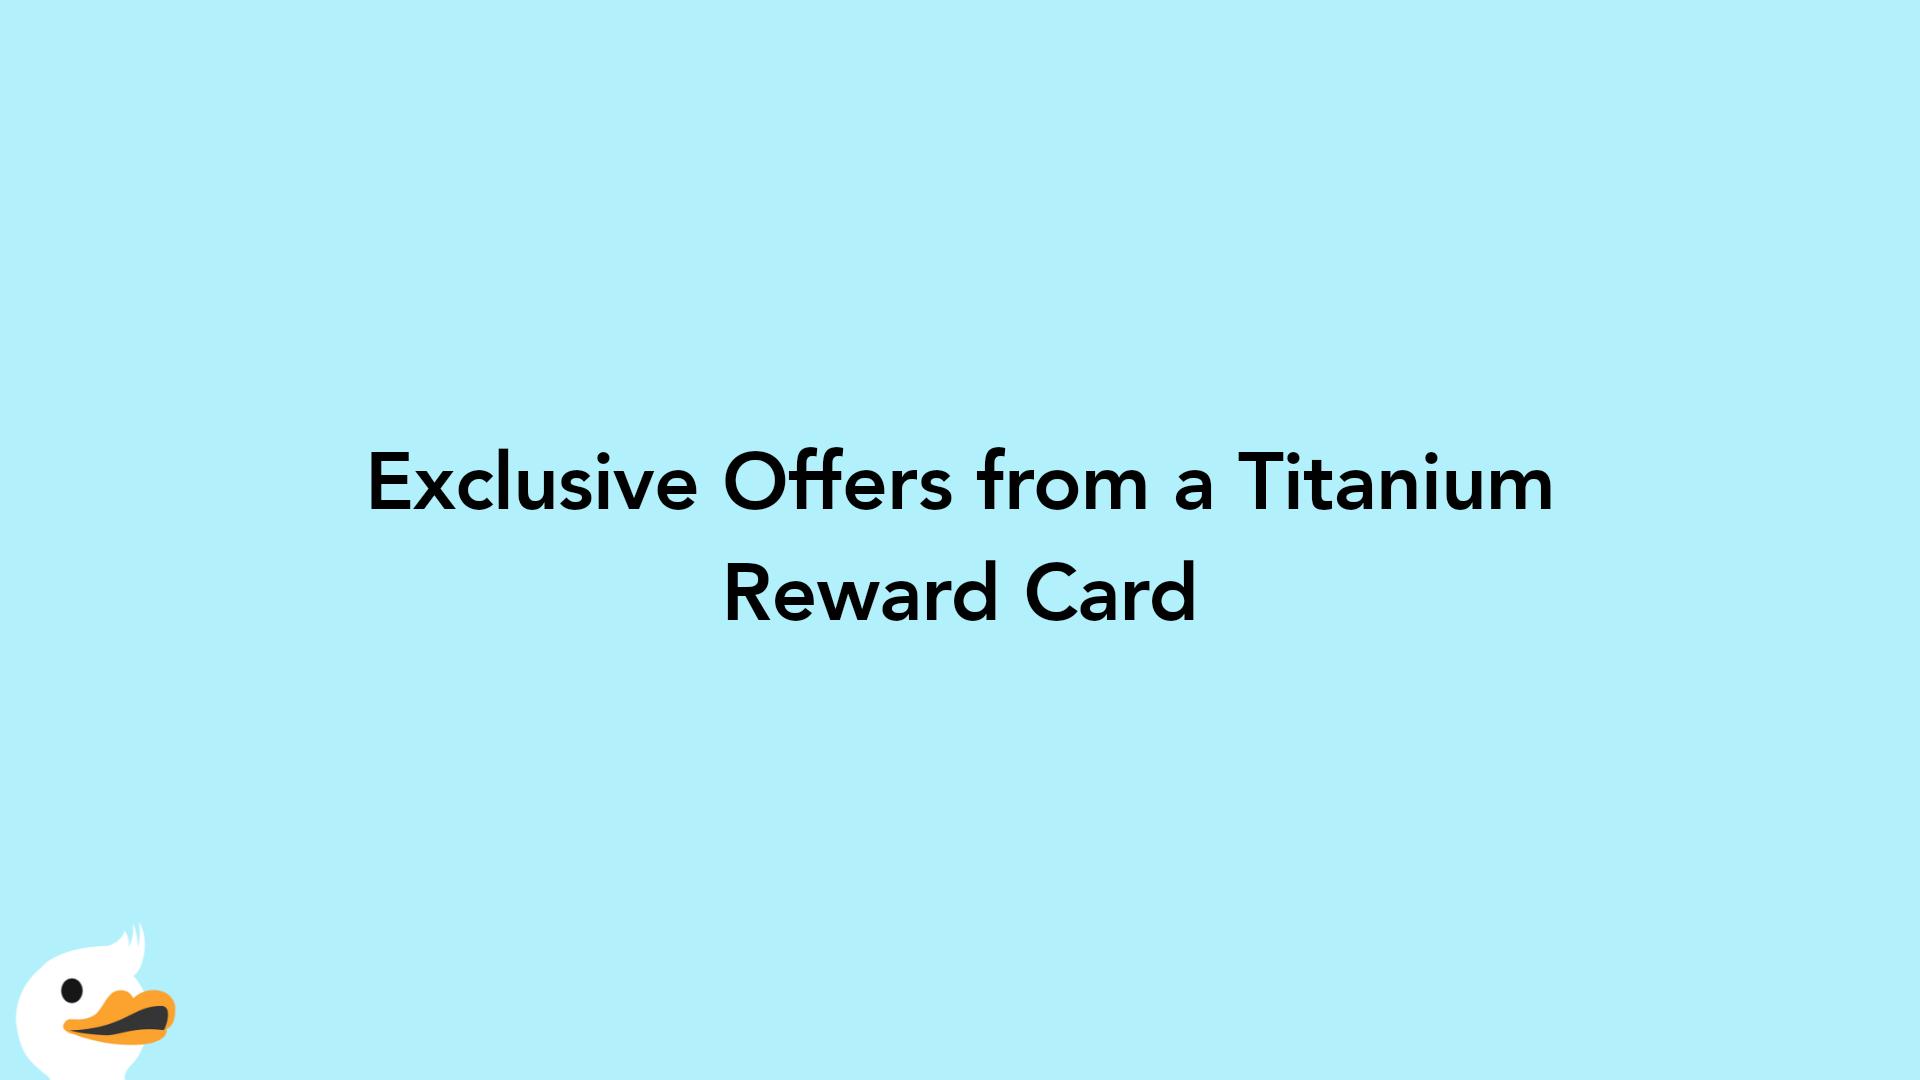 Exclusive Offers from a Titanium Reward Card